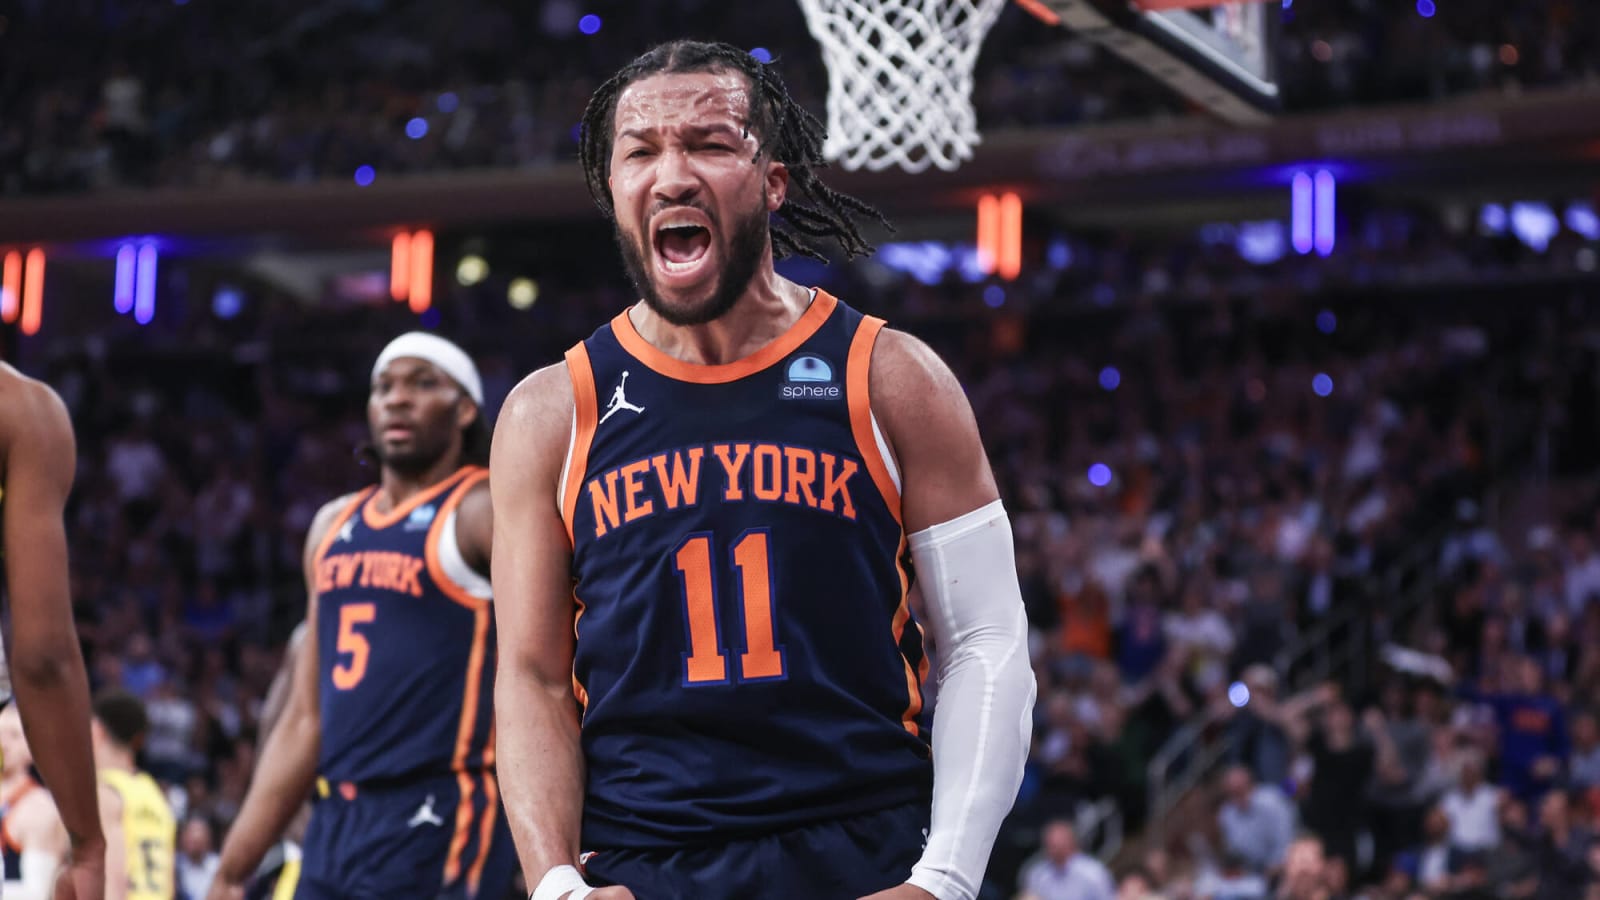 Ranking The 10 Greatest Point Guards In New York Knicks History: Jalen Brunson Is Already One Of Them